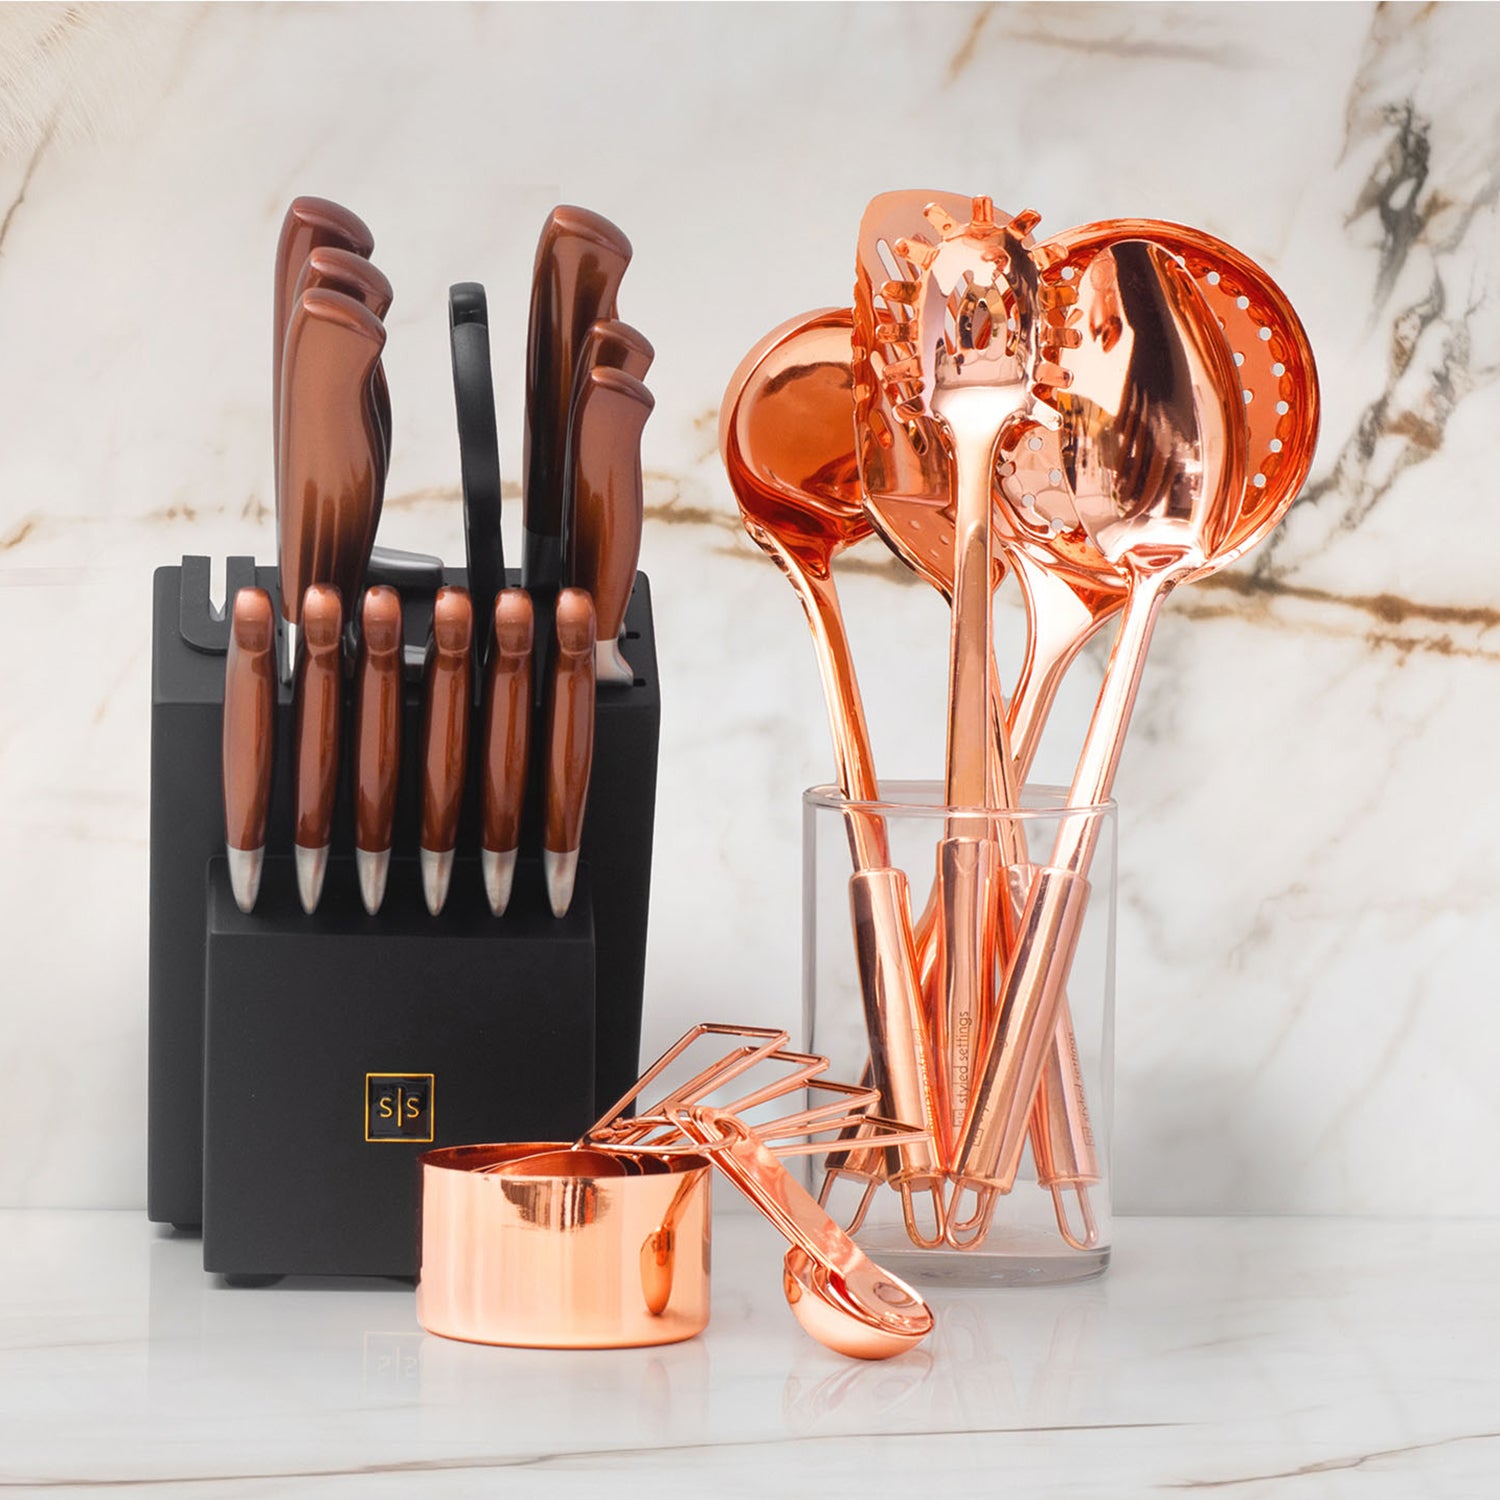 Copper Cooking Utensils Set - Styled Settings